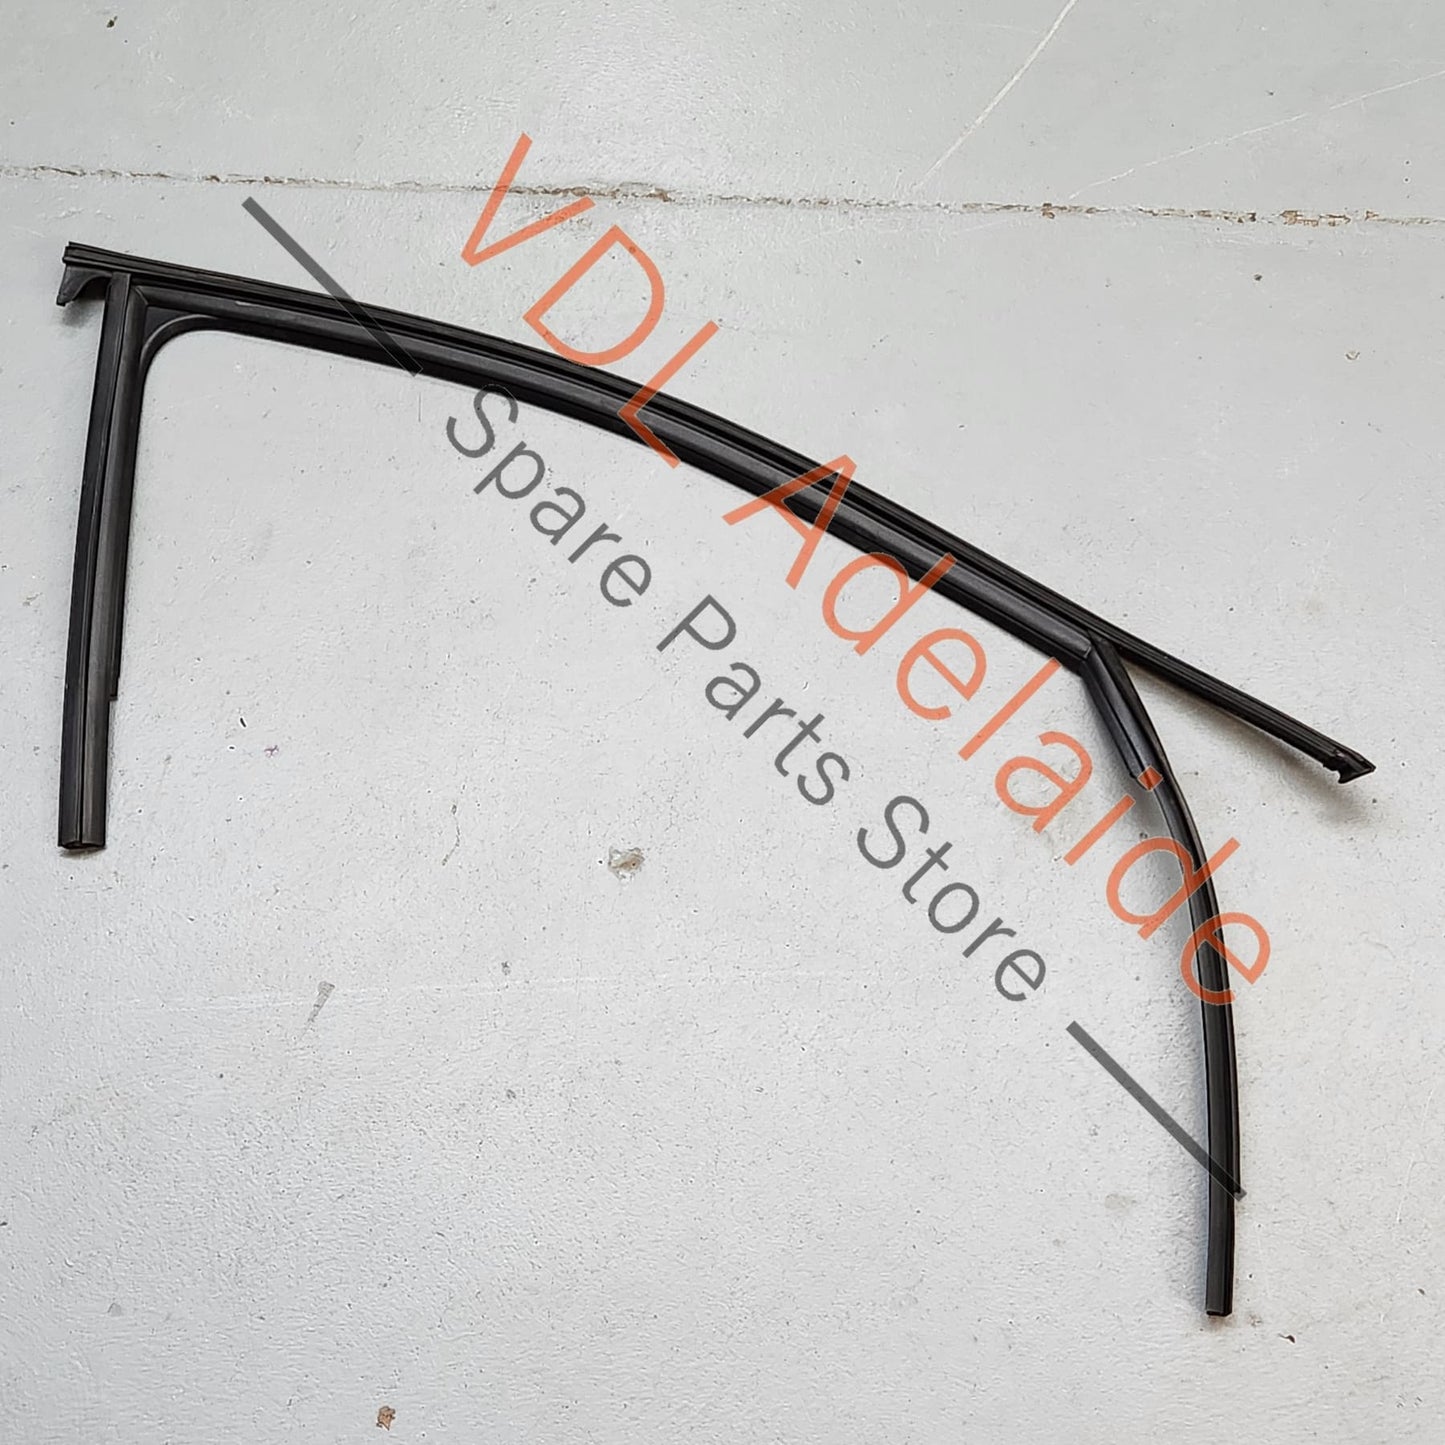 83A837432    Audi Q3 RSQ3 F3 Front Right Door Window Seal Rubber 83A837432